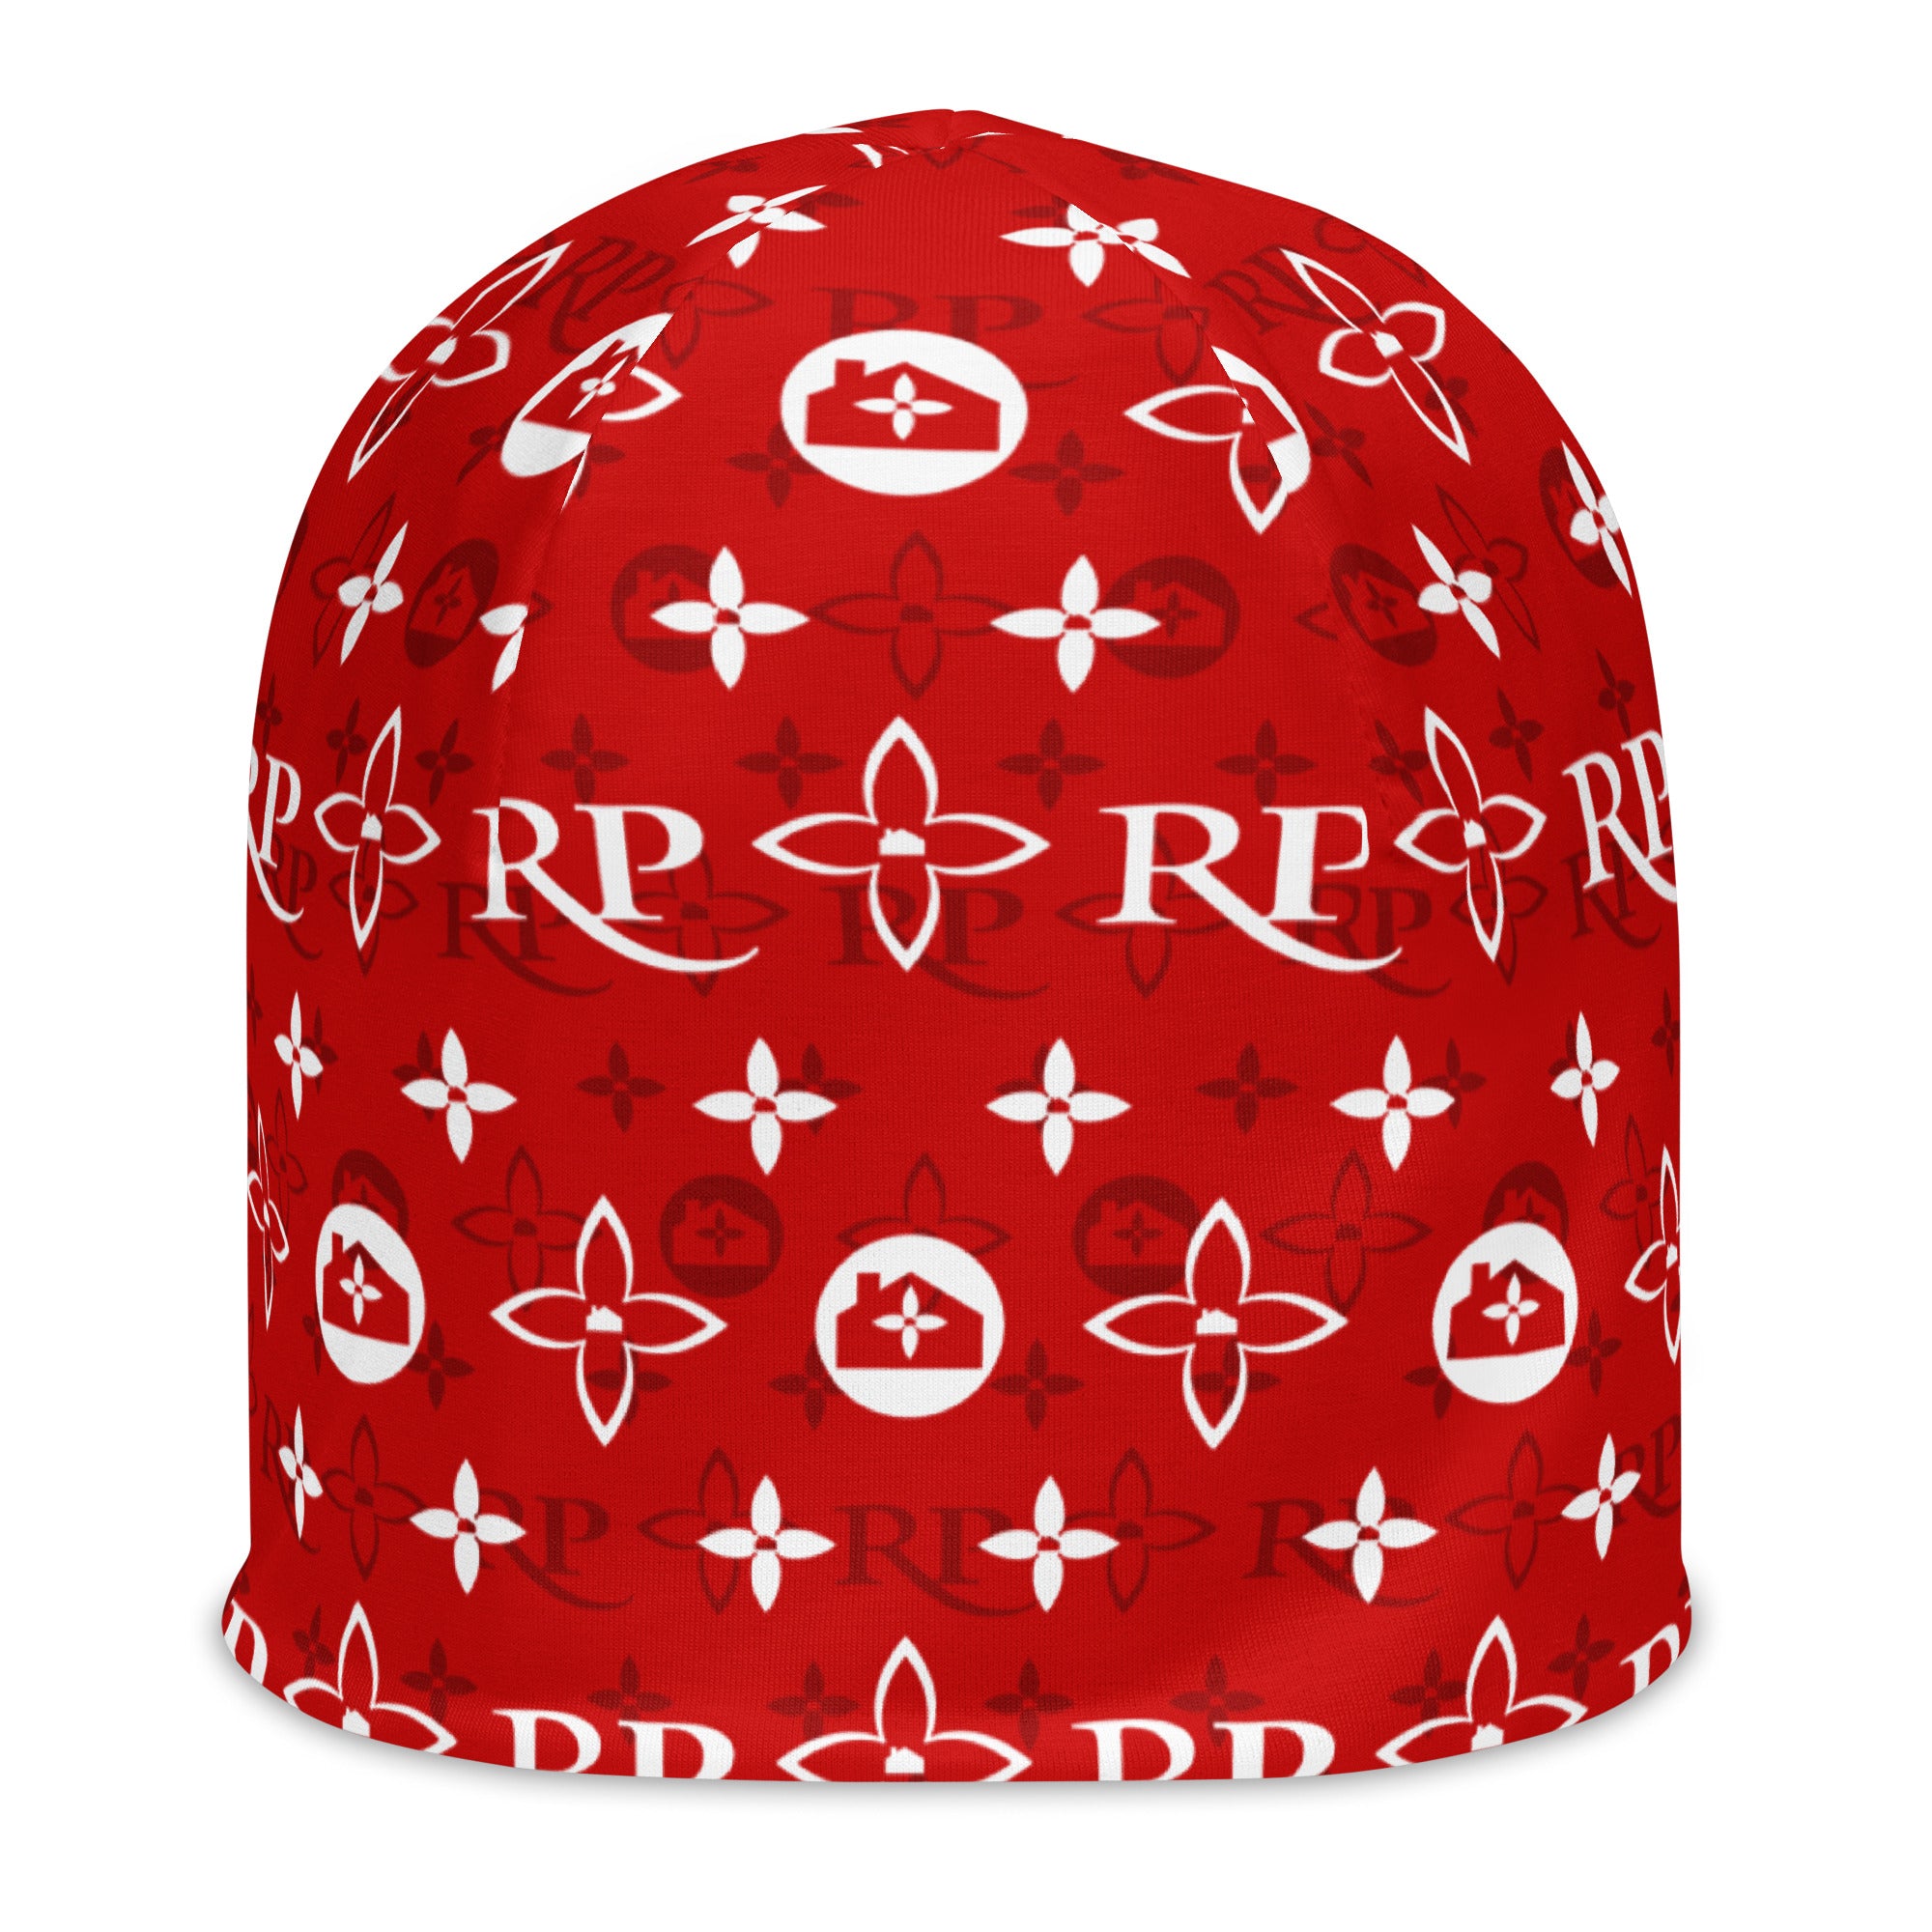 Lv Beanie Hats  Natural Resource Department